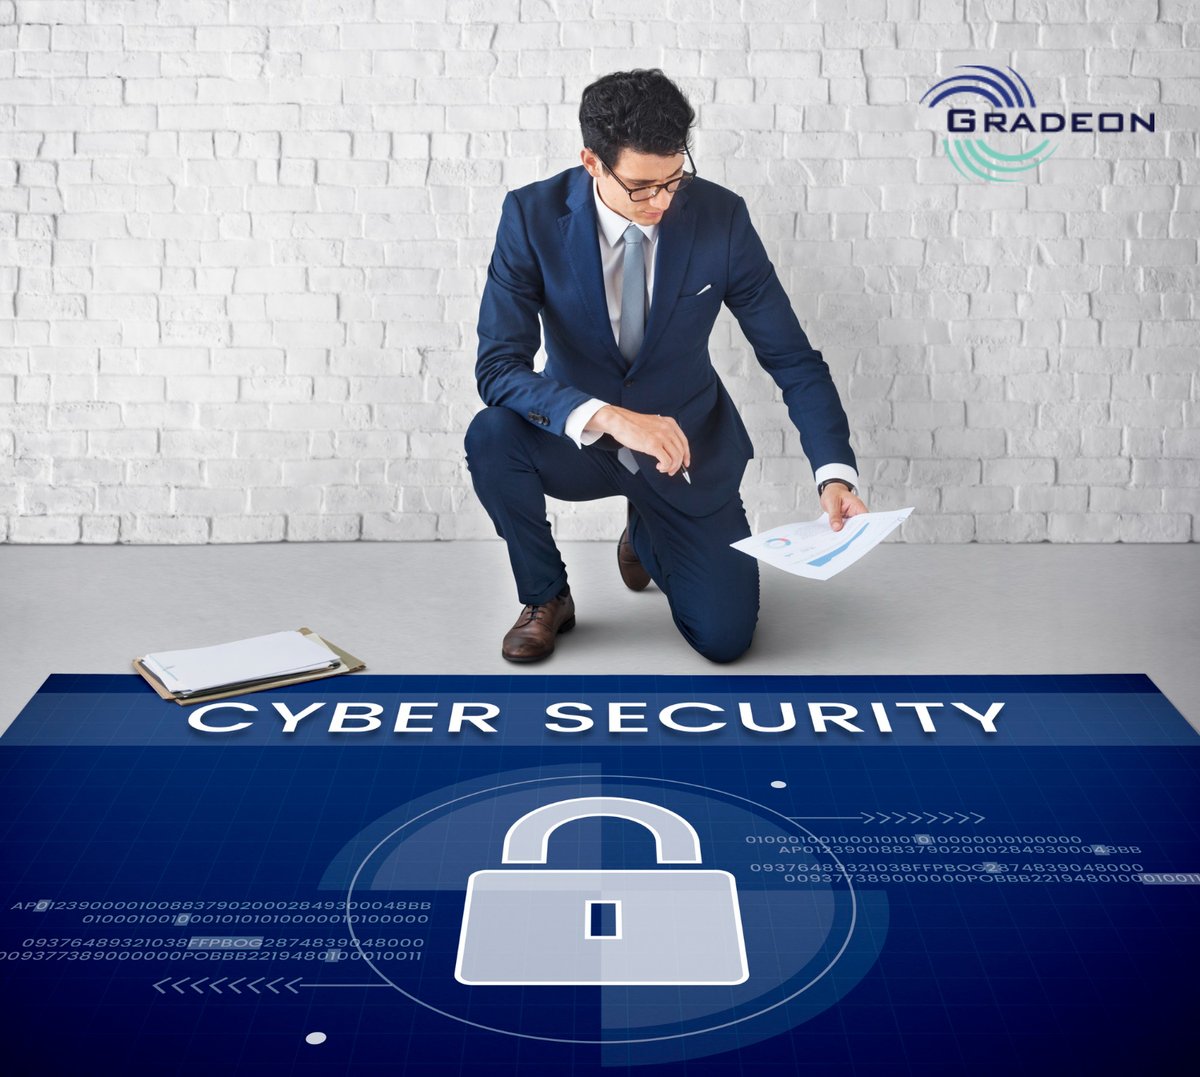 In the event of a cyber incident, swift action is crucial. #Gradeon’s incident response consulting ensures a rapid and effective response, minimising damage and downtime. #IncidentResponse #Consulting